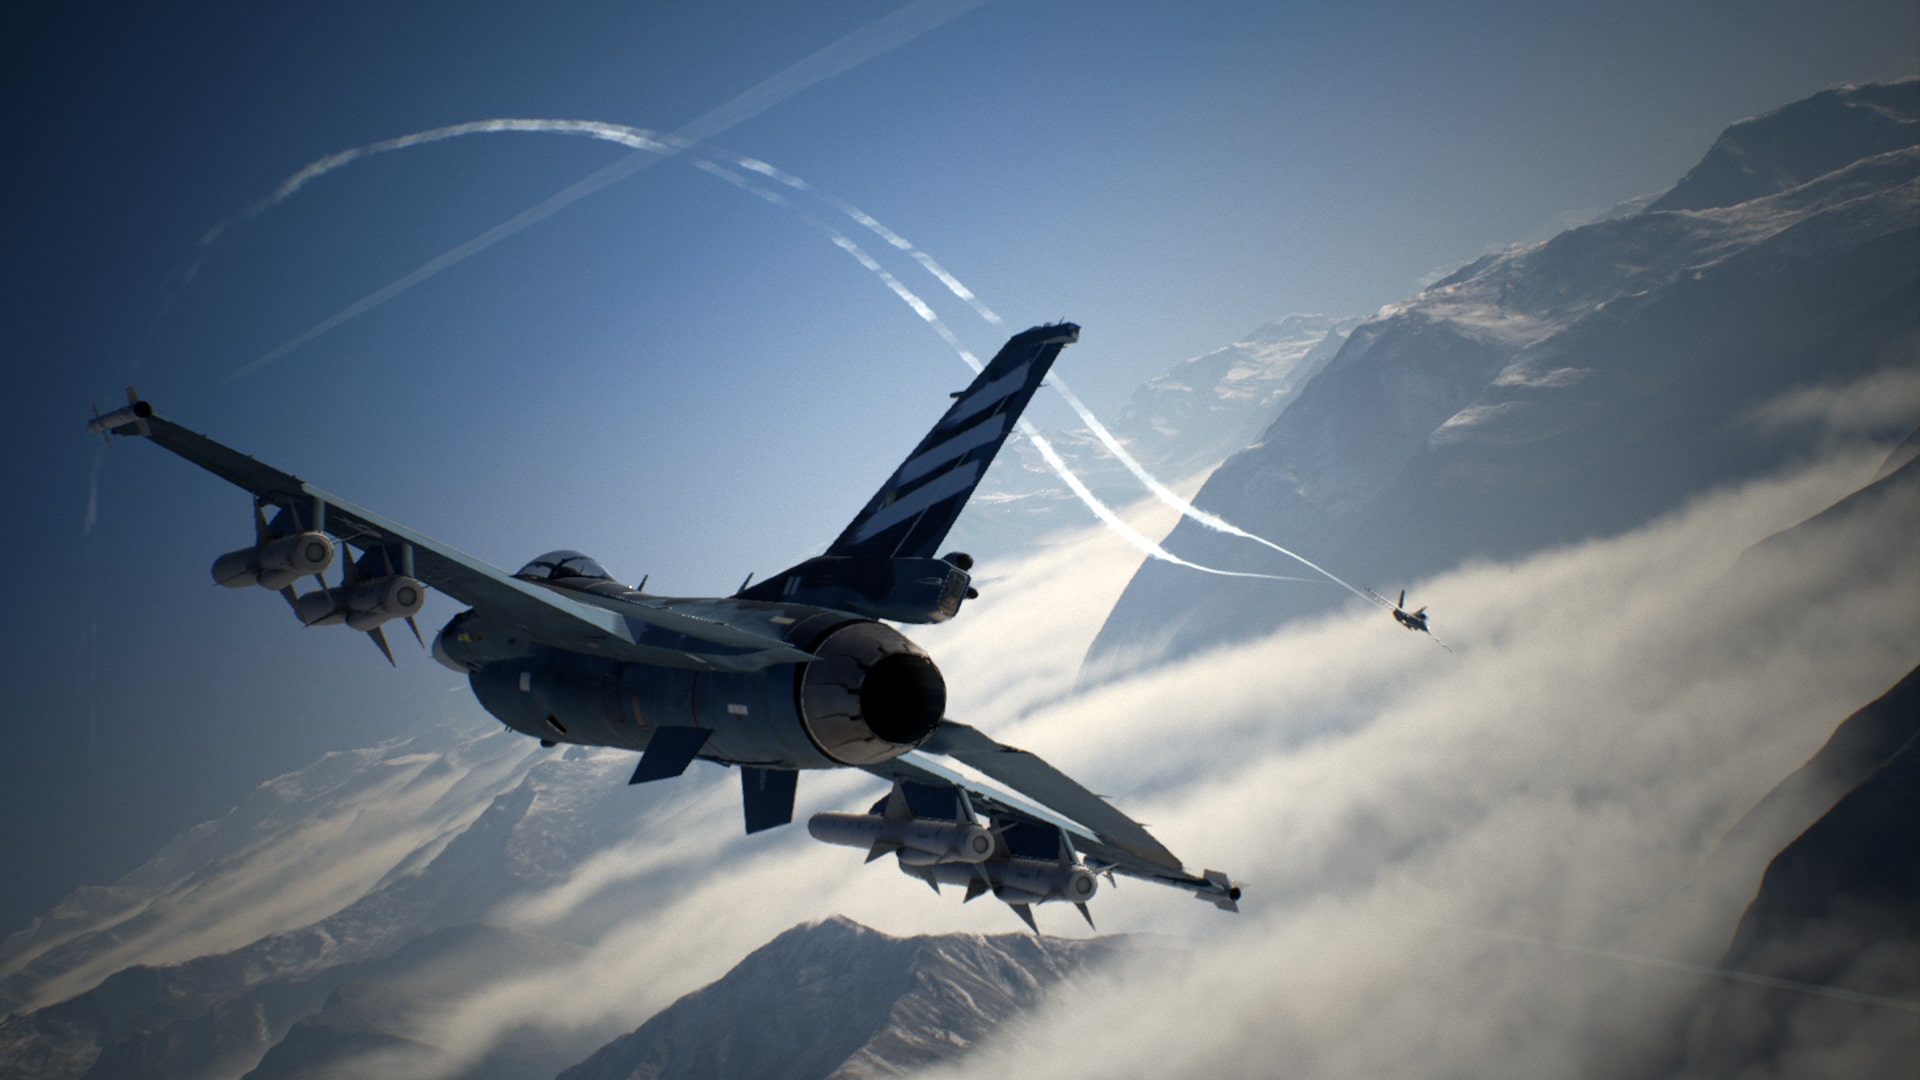 PS5) ACE COMBAT 7 is GORGEOUS! 4K 60FPS UHD GAMING 